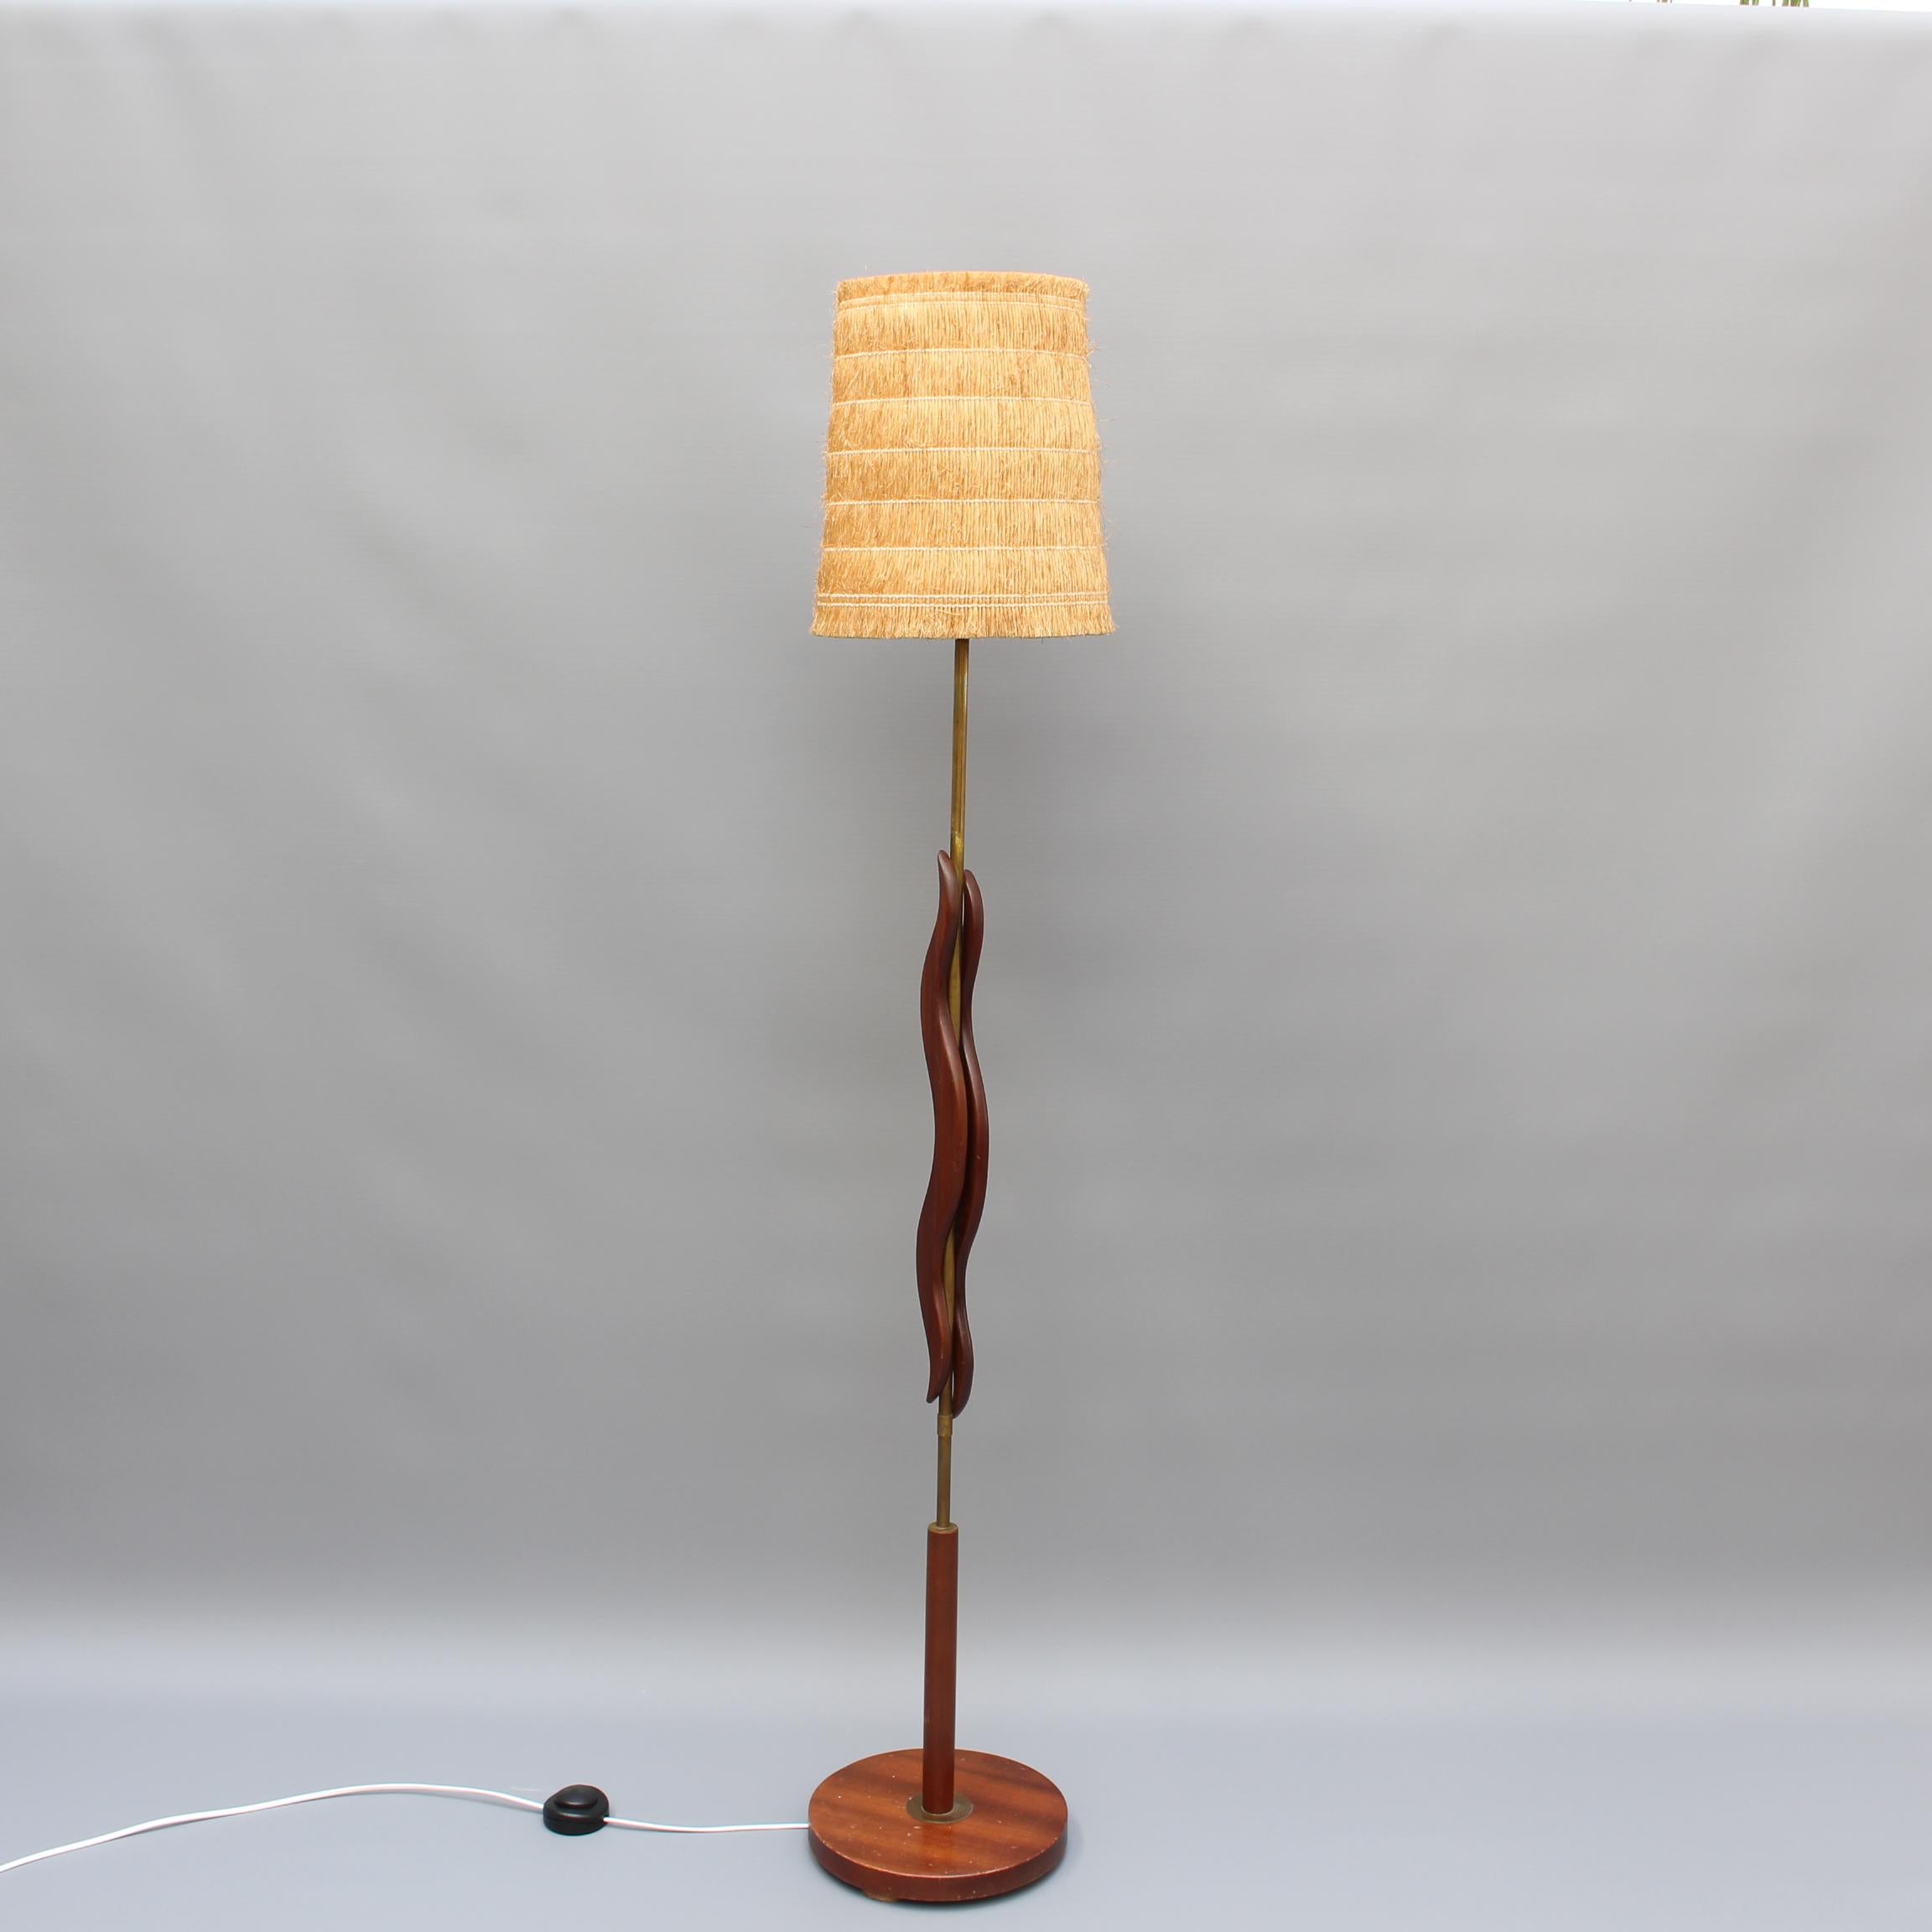 Midcentury French wooden and brass floor lamp (circa 1950s). A beautiful reddish wood intermittently covers the brass lamp pole which ascends to the stylish, raffia lampshade. The curved wood is reminiscent of the flame from a candle. The round